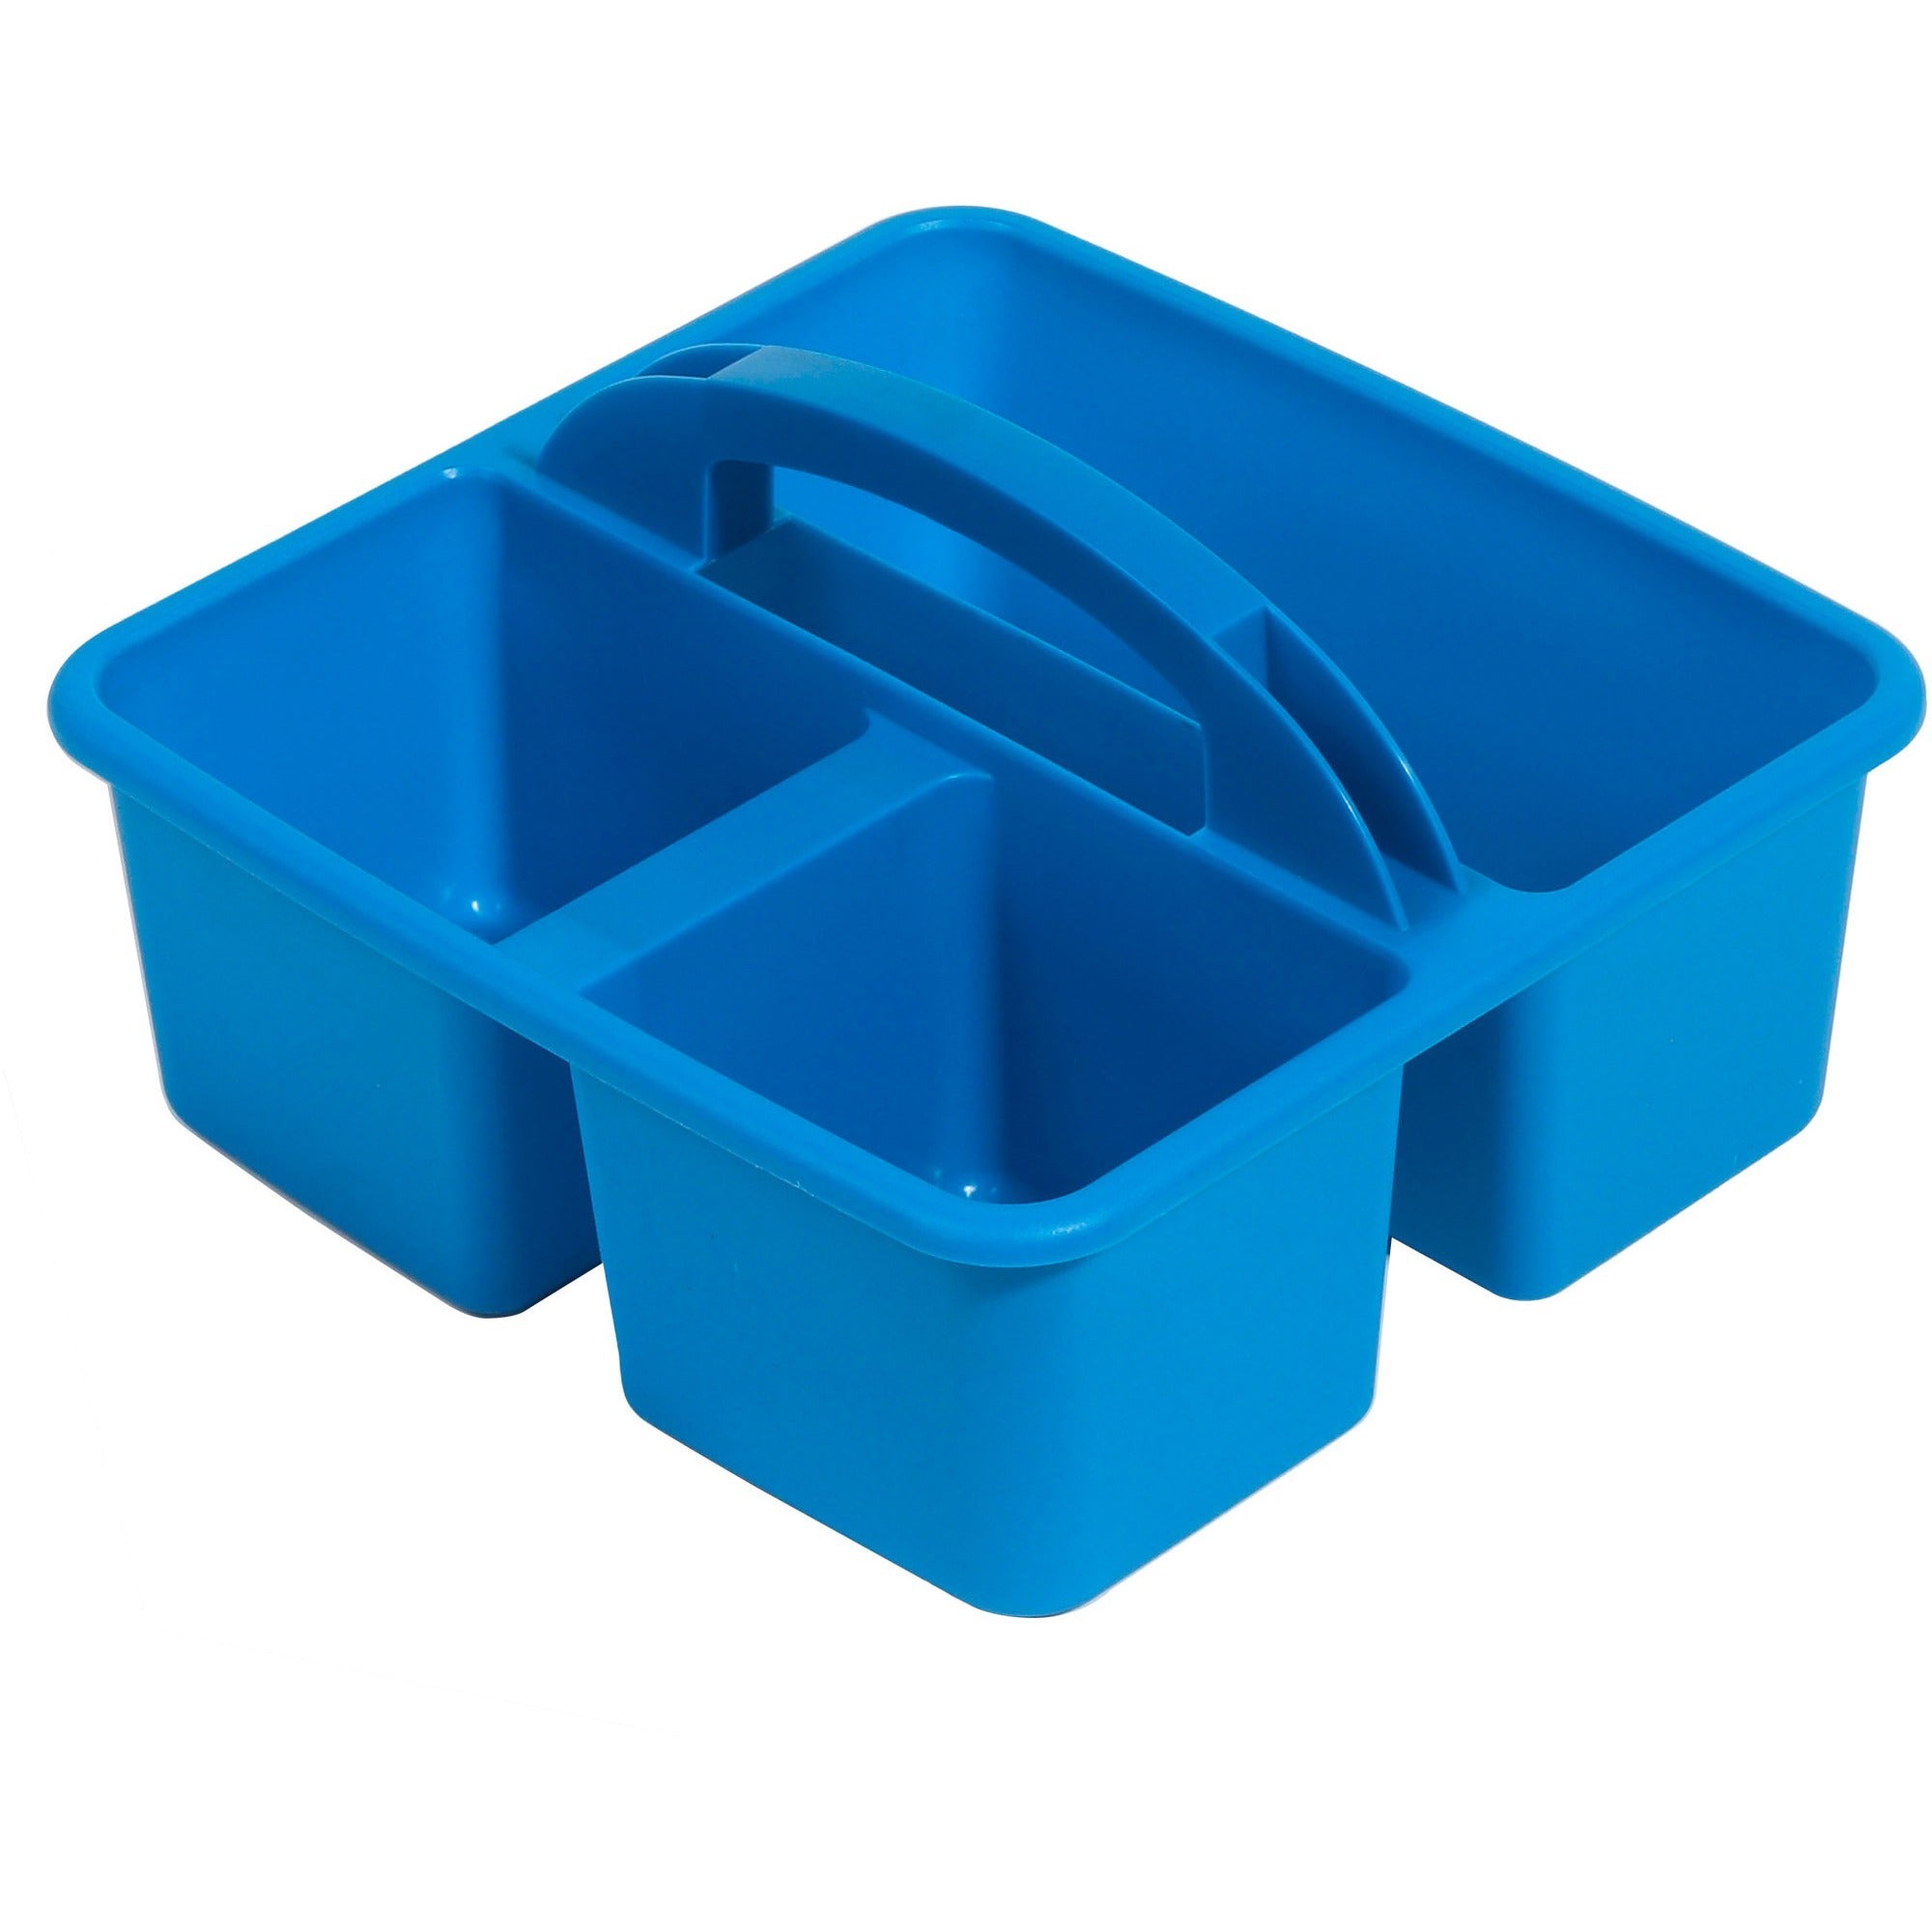 deflecto-antimicrobial-kids-storage-caddy-3-compartments-53-height-x-94-width-x-93-depth-antimicrobial-lightweight-portable-mold-resistant-mildew-resistant-durable-washable-stackable-blue-polypropylene-1-each_def39505blu - 1